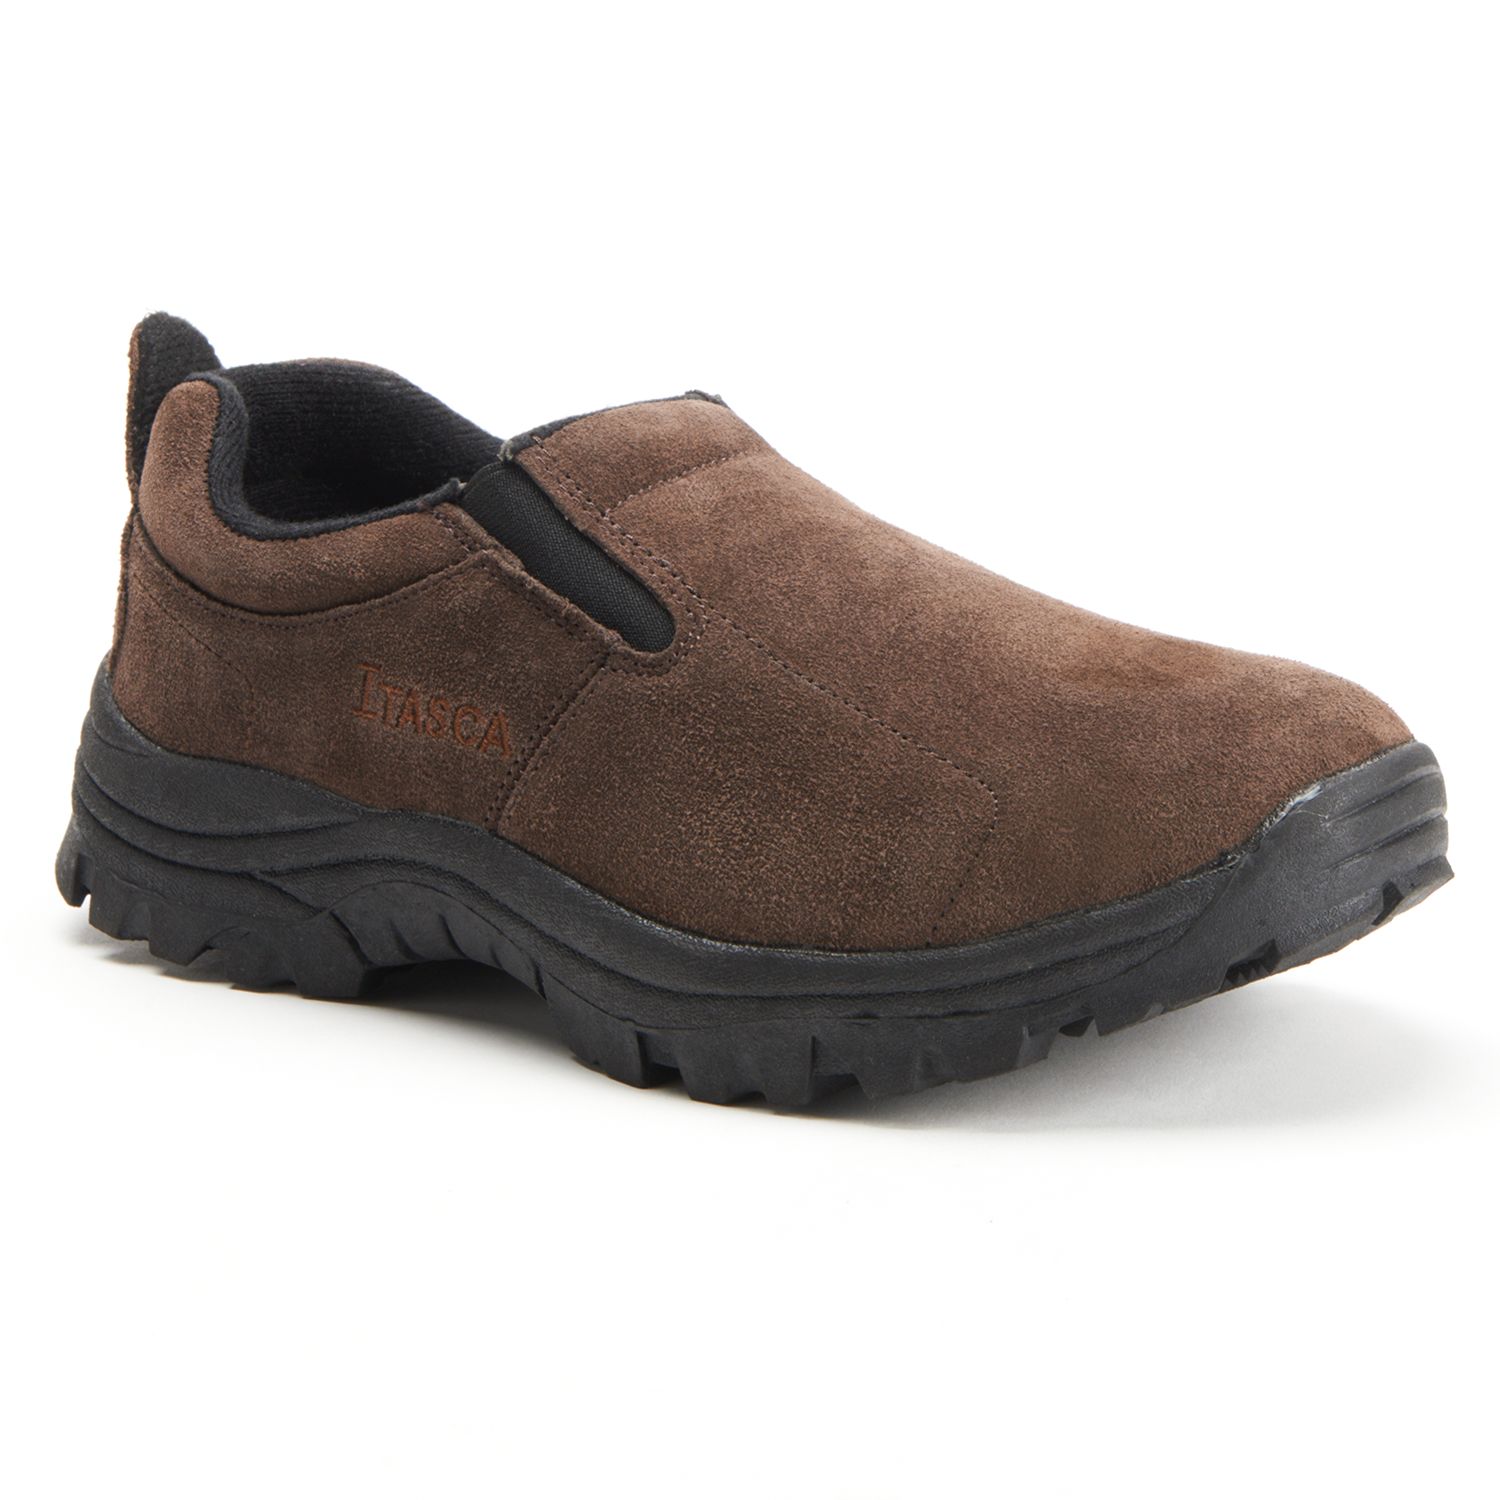 men's casual shoes at kohl's